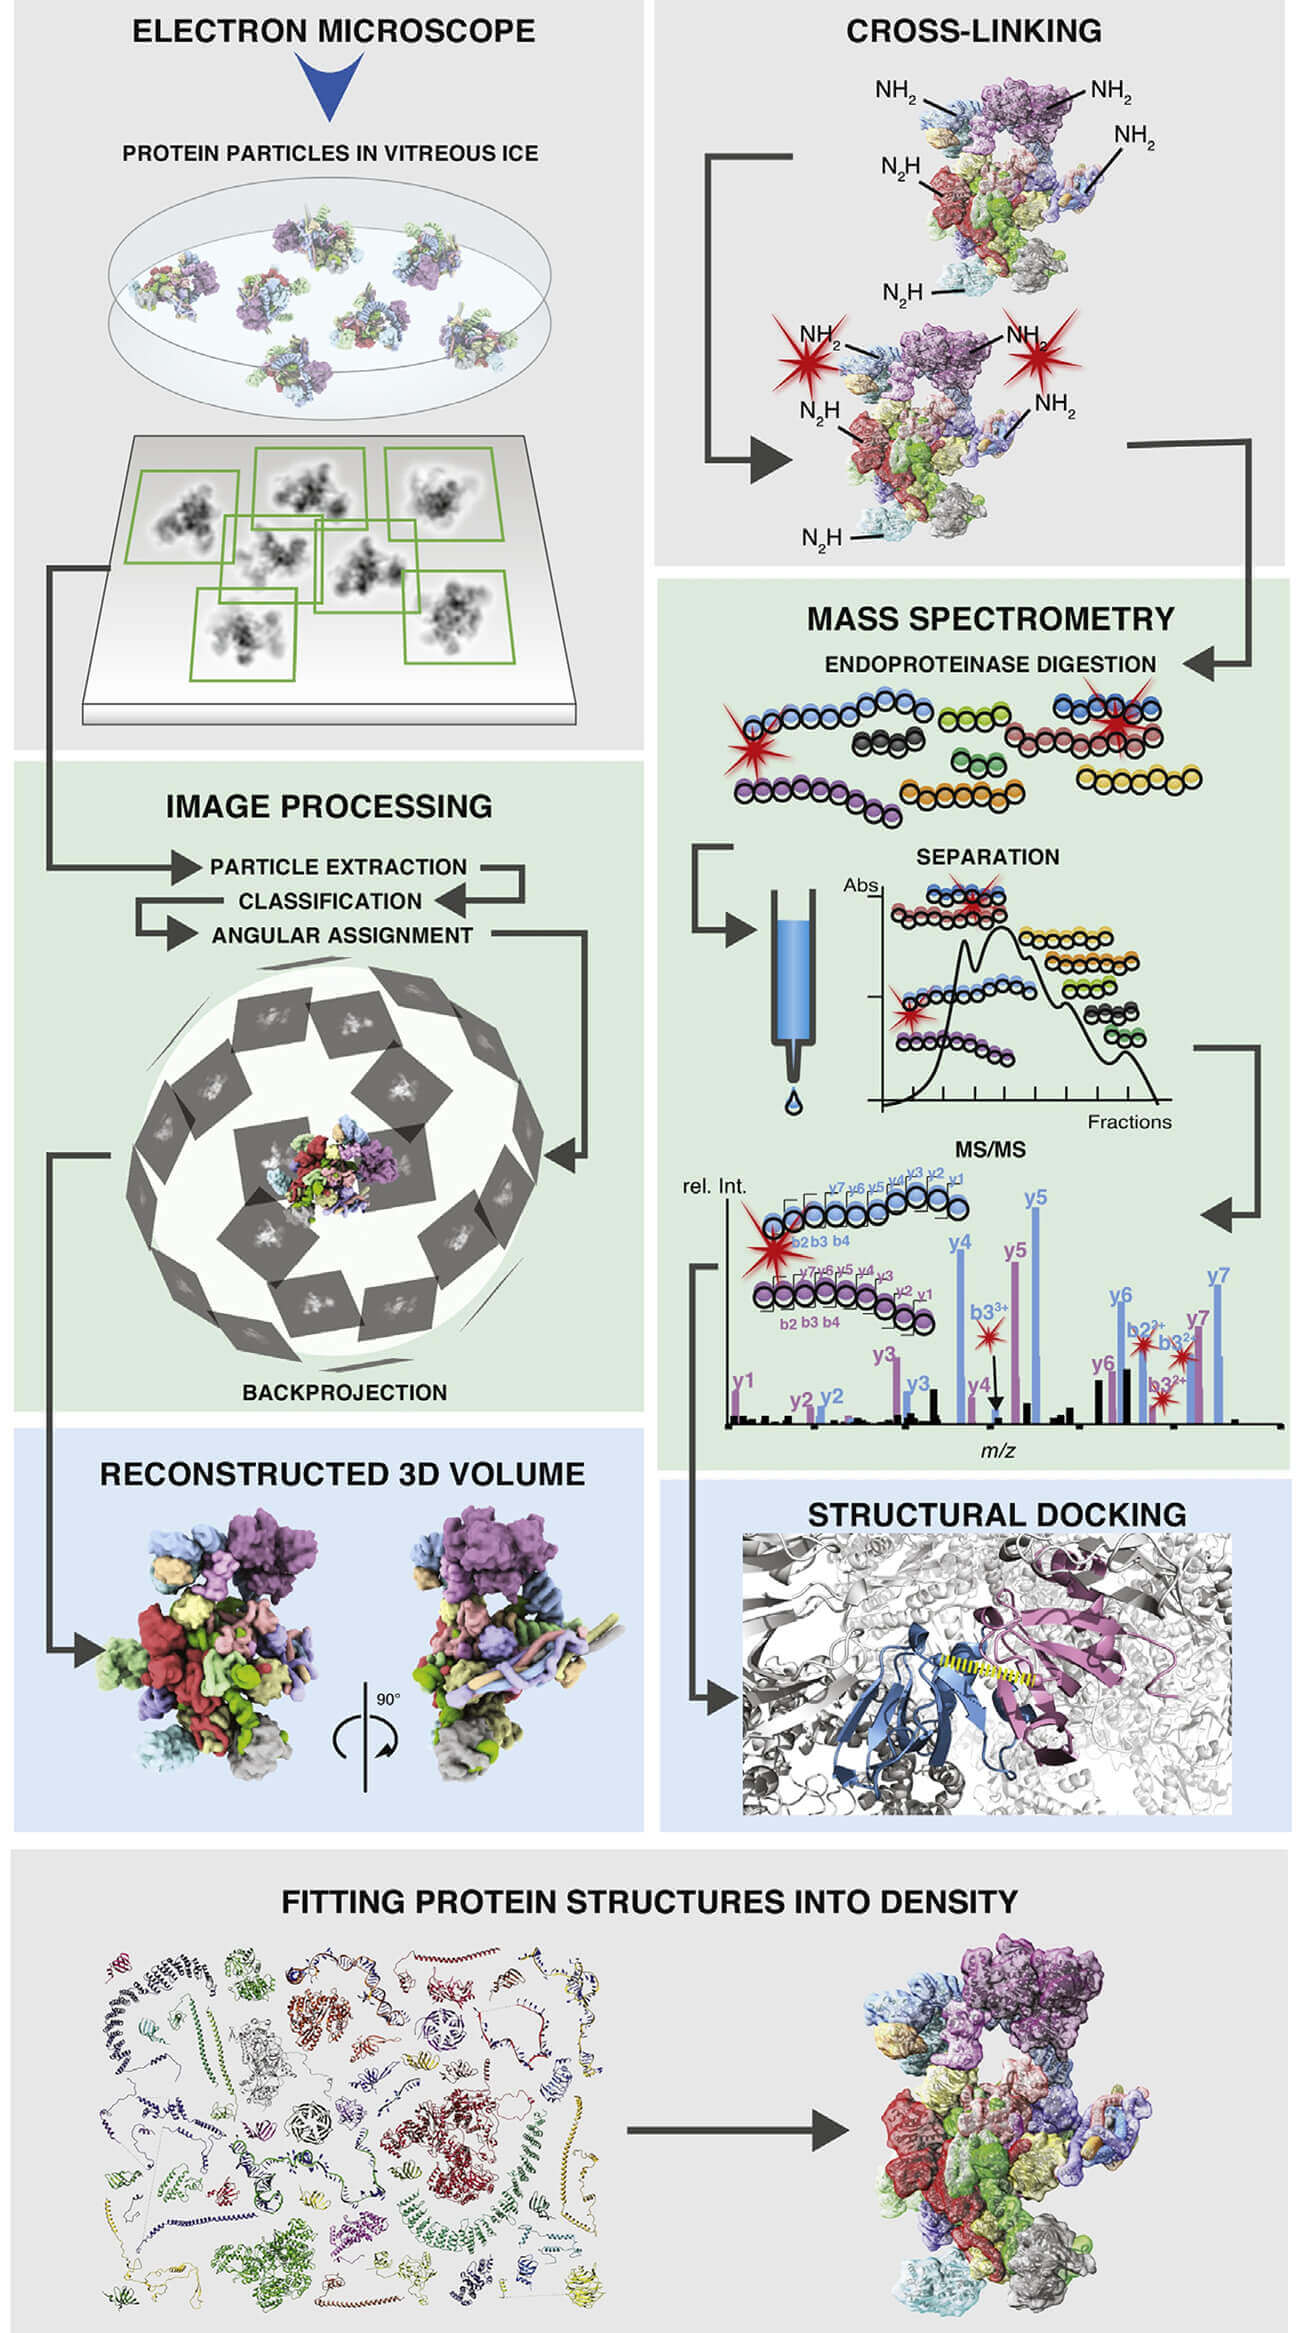 Combinational Applications of Cryo-EM and Mass Spectrometry